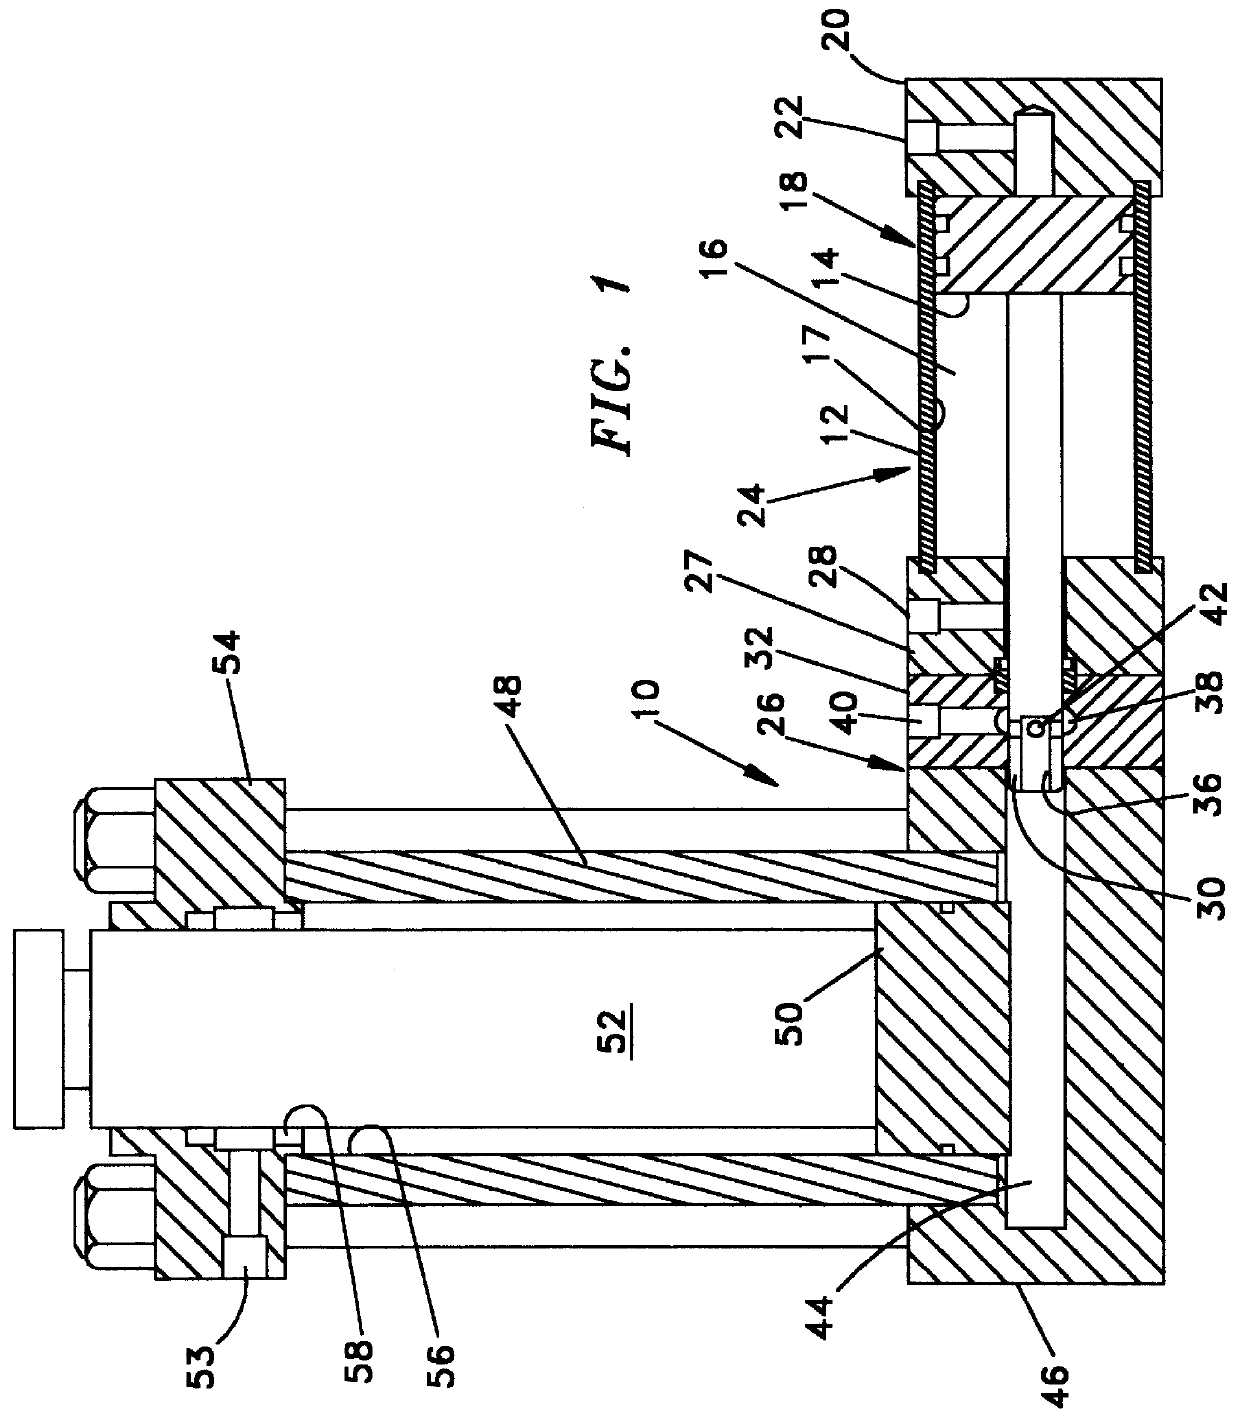 Fluid actuator system having means for internally increasing the fluid pressure therein